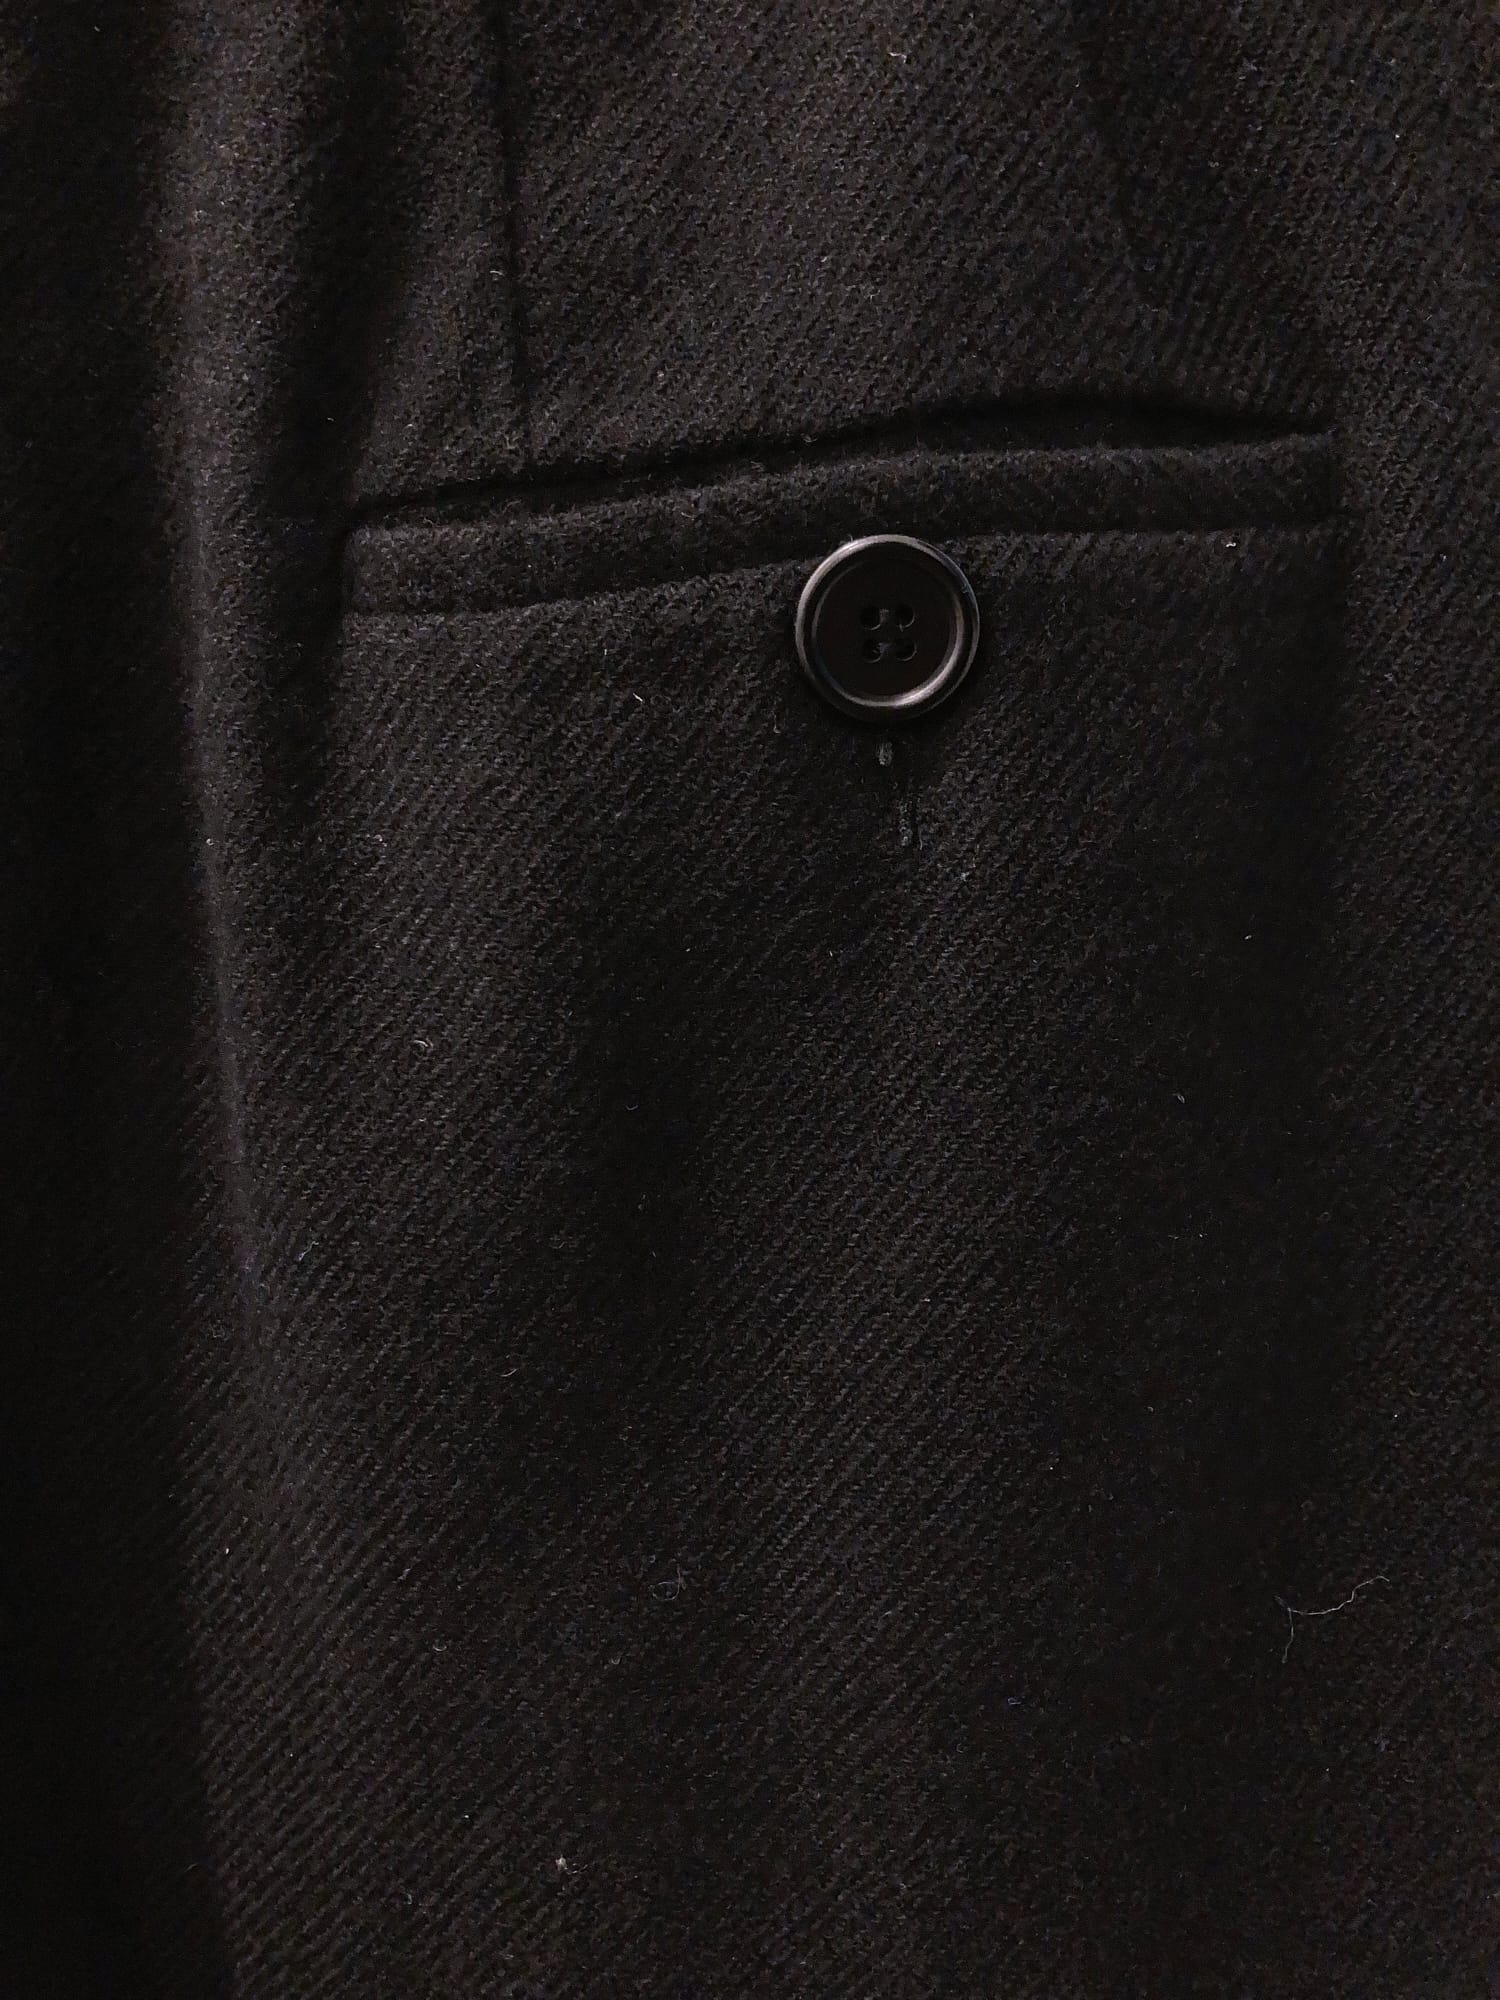 Dirk Bikkembergs 1990s 2000s black wool cashmere pleated trousers